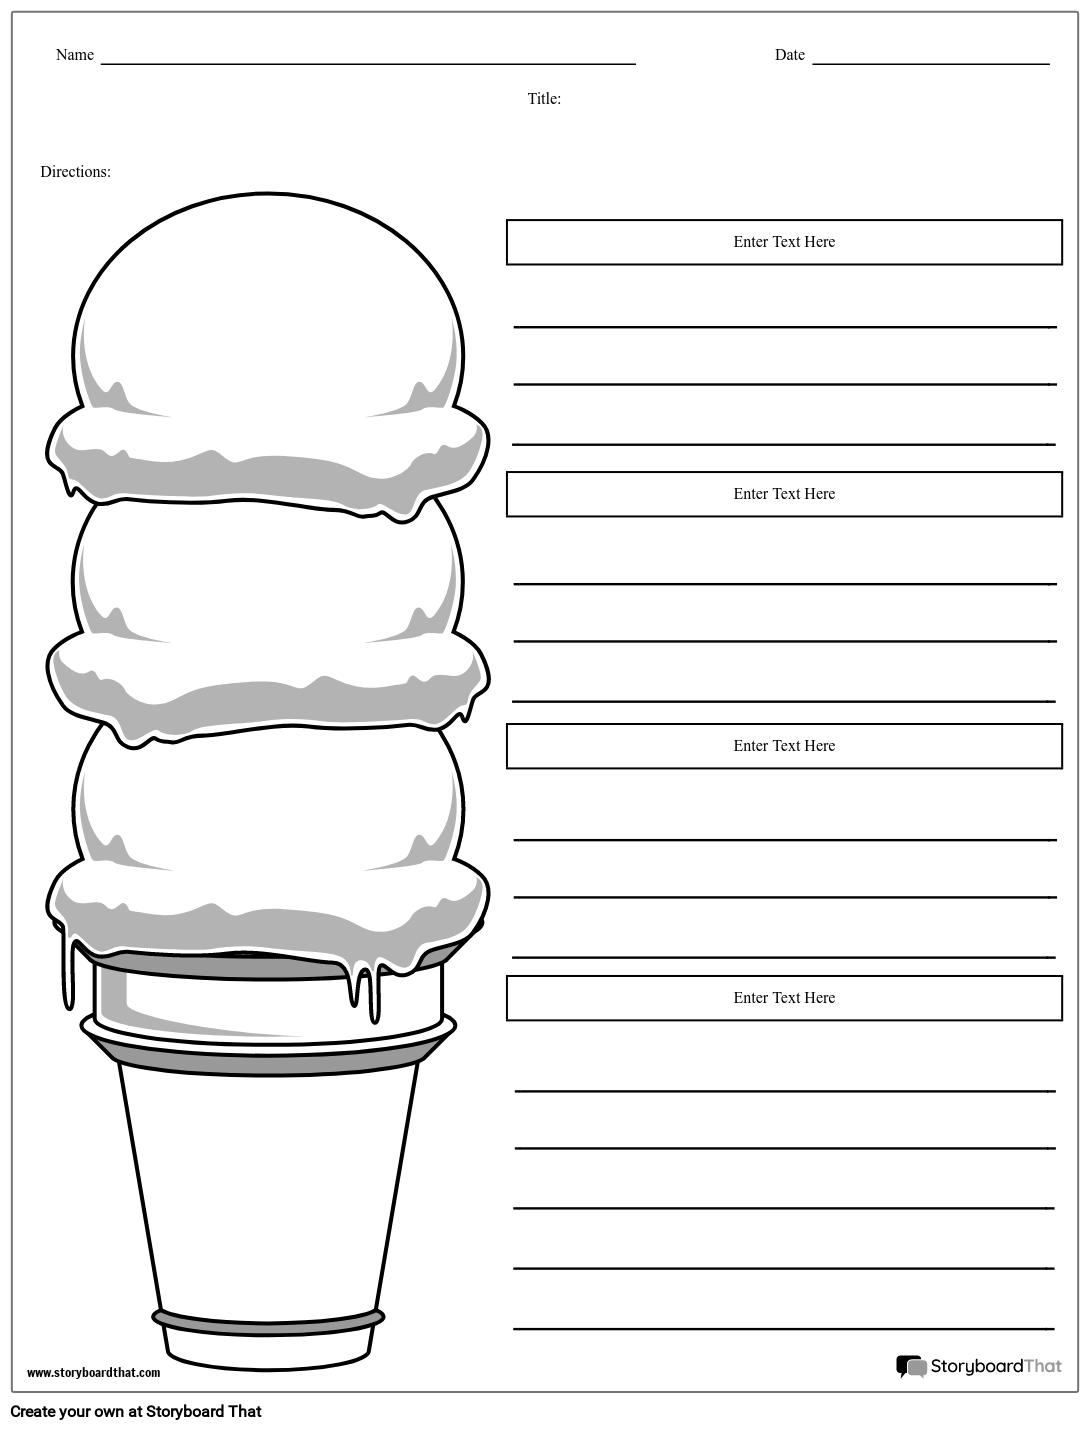 ice-cream-cone-paragraph-storyboard-by-worksheet-templates